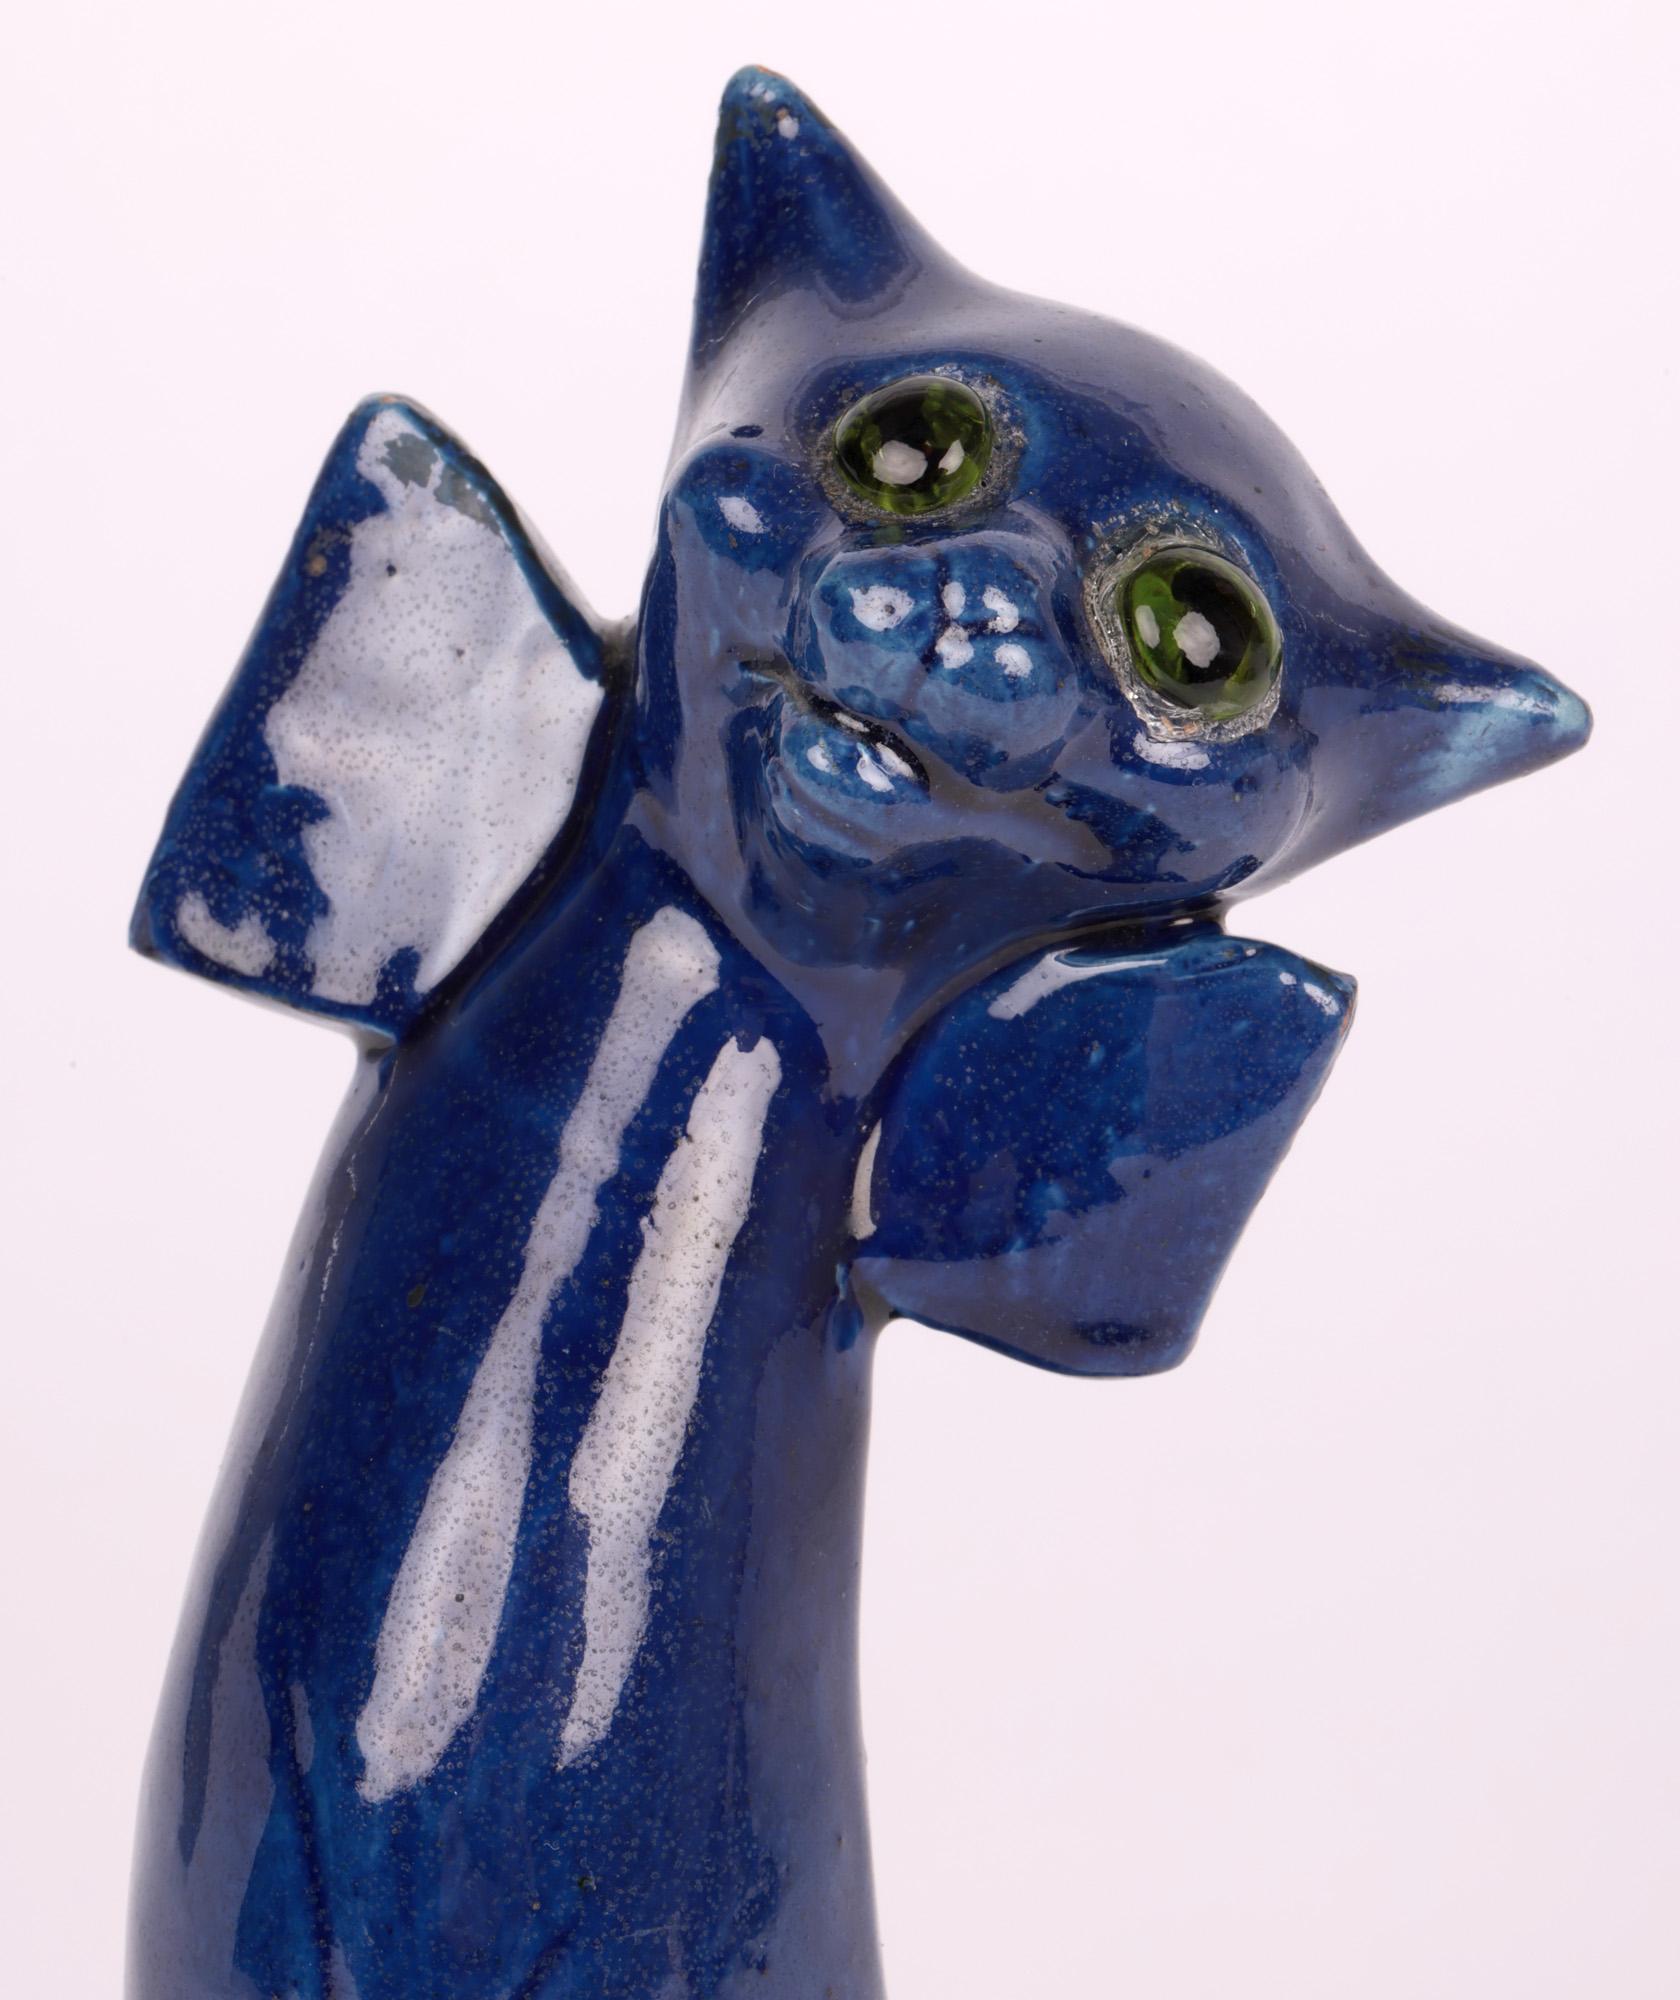 An unusual large art pottery figure of a grotesque smiling cat with glass eyes from an original design by Blanche Vulliamy made by Charles Hubert Brannam and dating from around 1905.
The Brannam pottery was started by Thomas Brannam in Barnstaple,